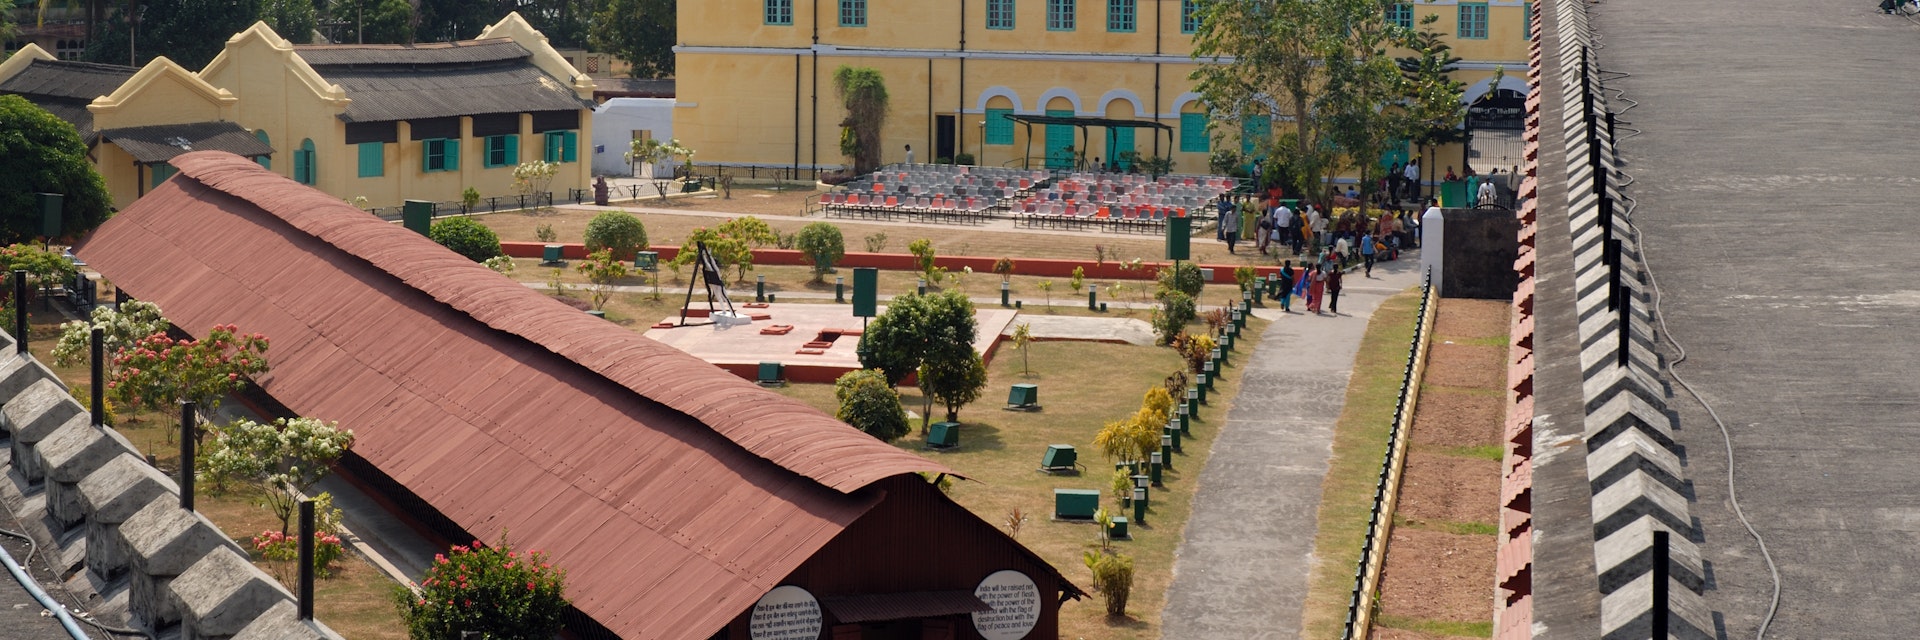 Cellular Jail, so named due to comprising solely of solitary confinement cells, now a National Memorial.